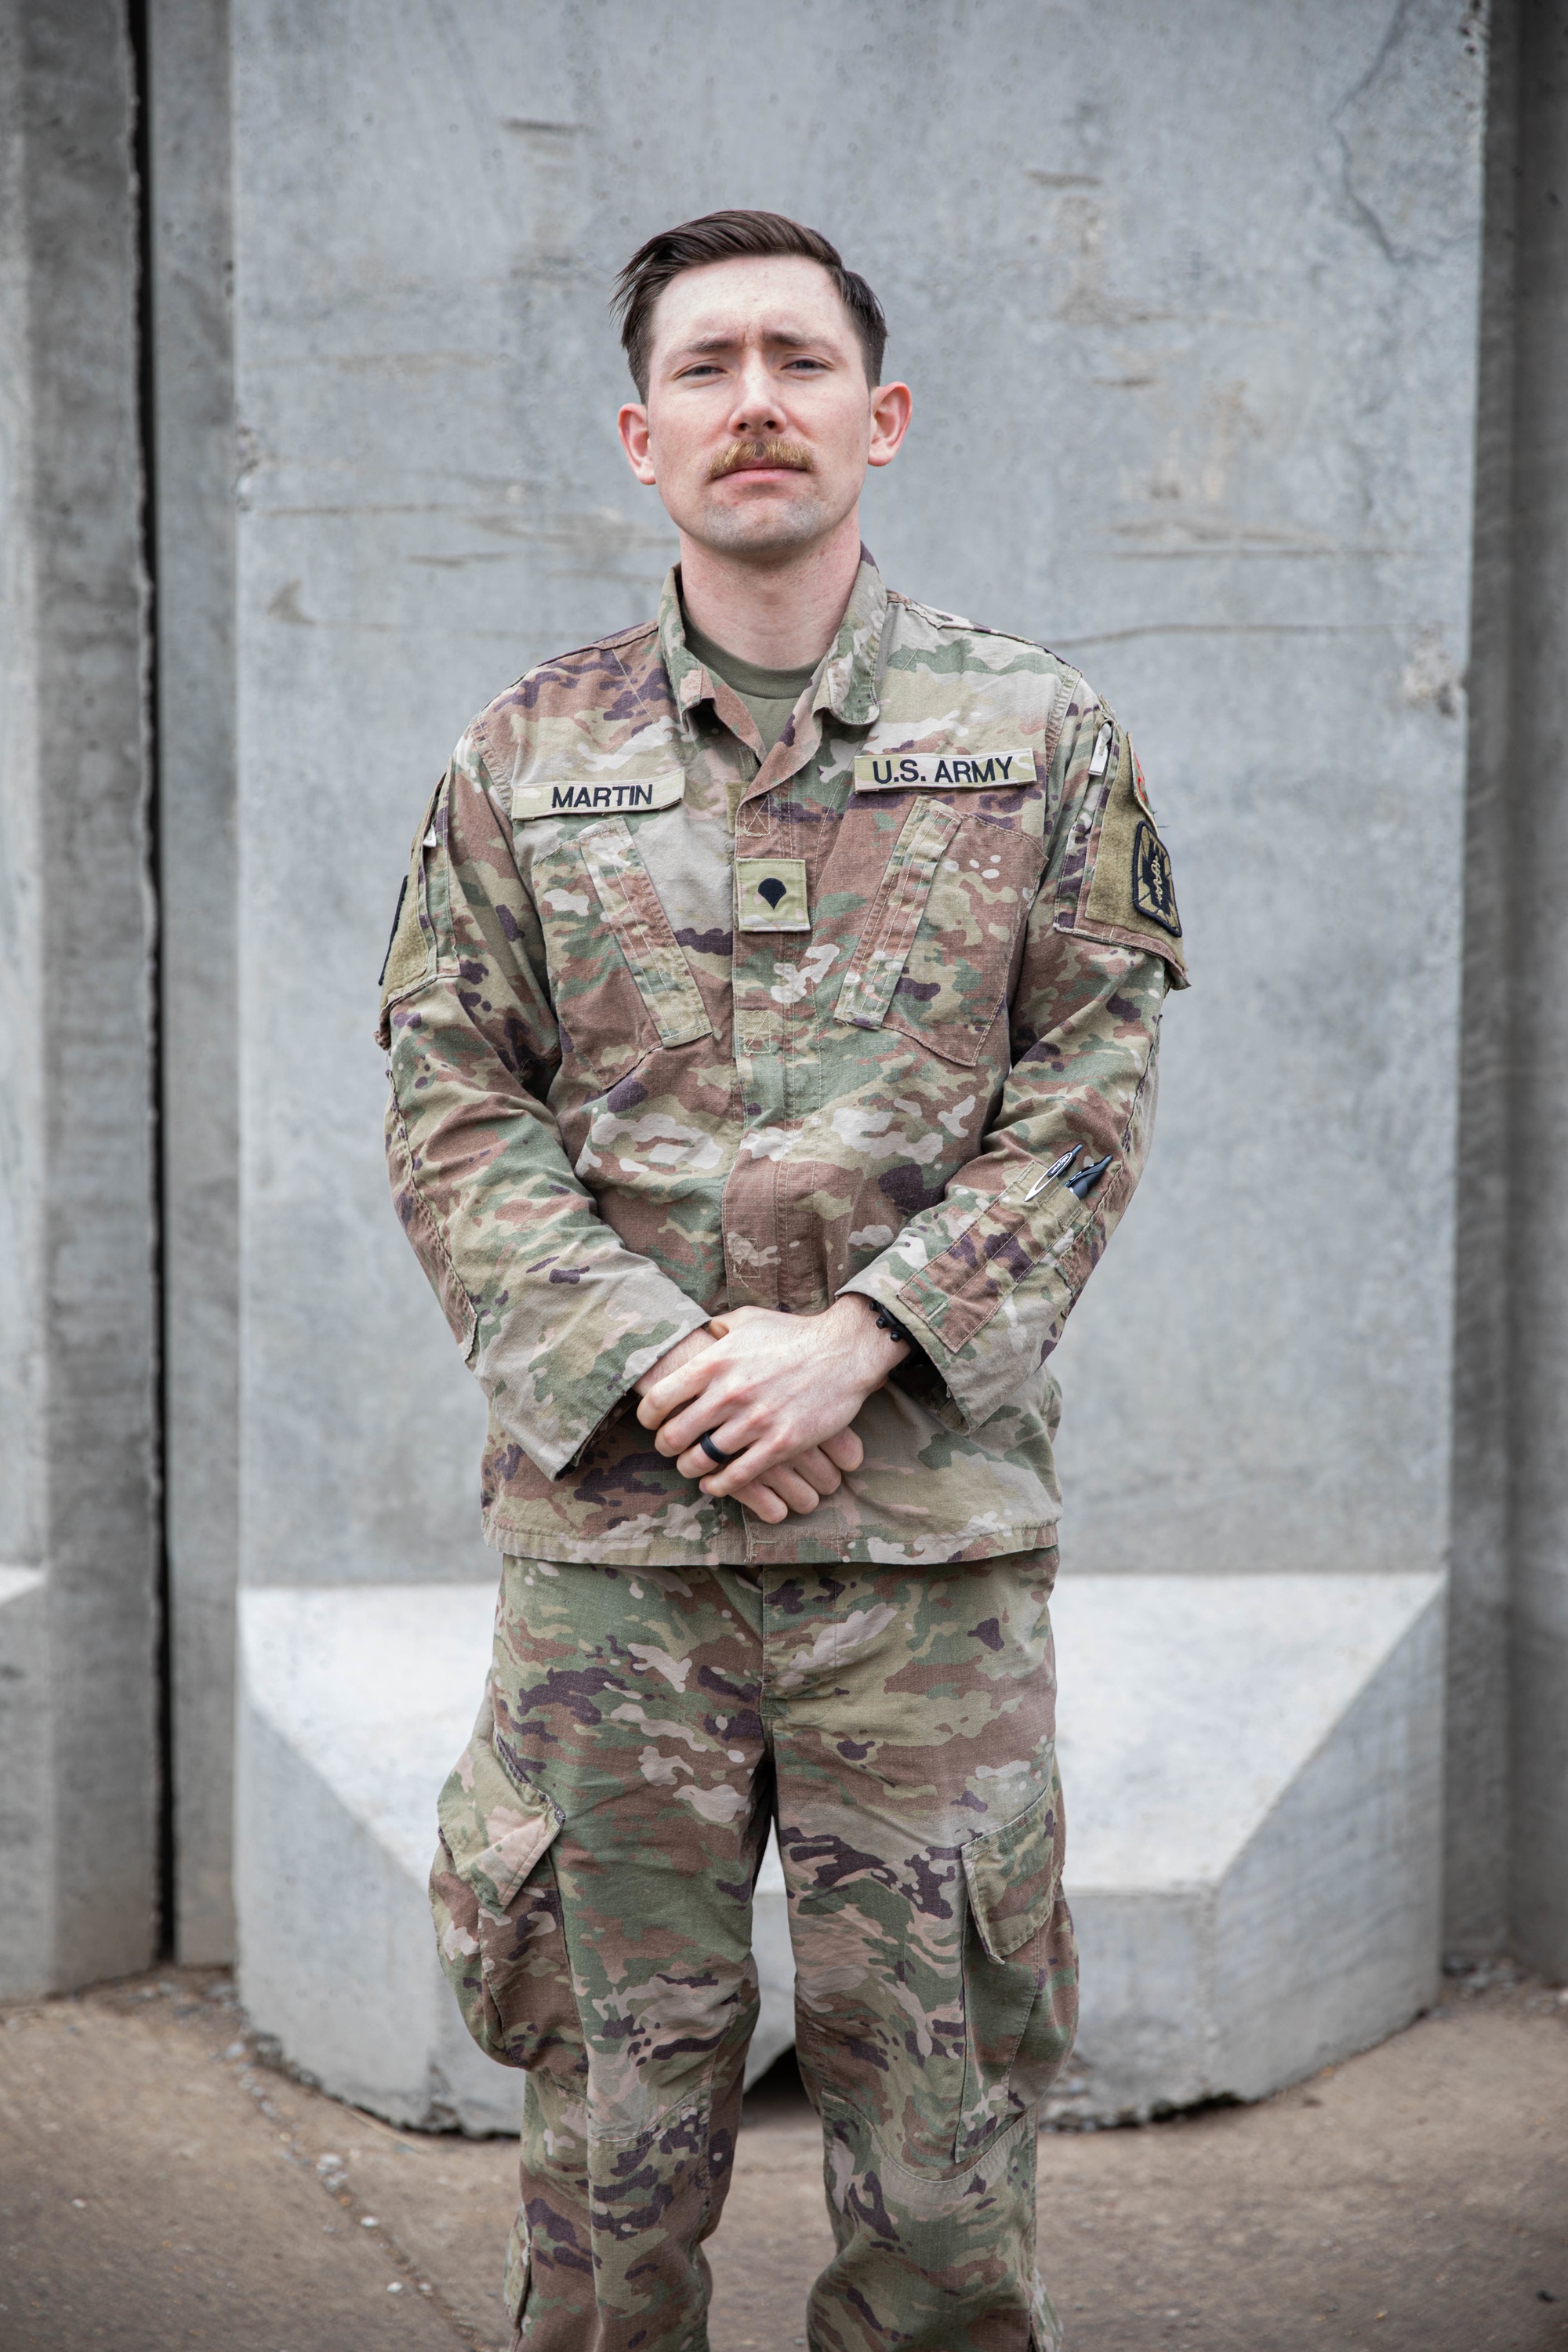 DVIDS - Images - Faces of the Coalition: U.S. Army Spc. Benjamin 